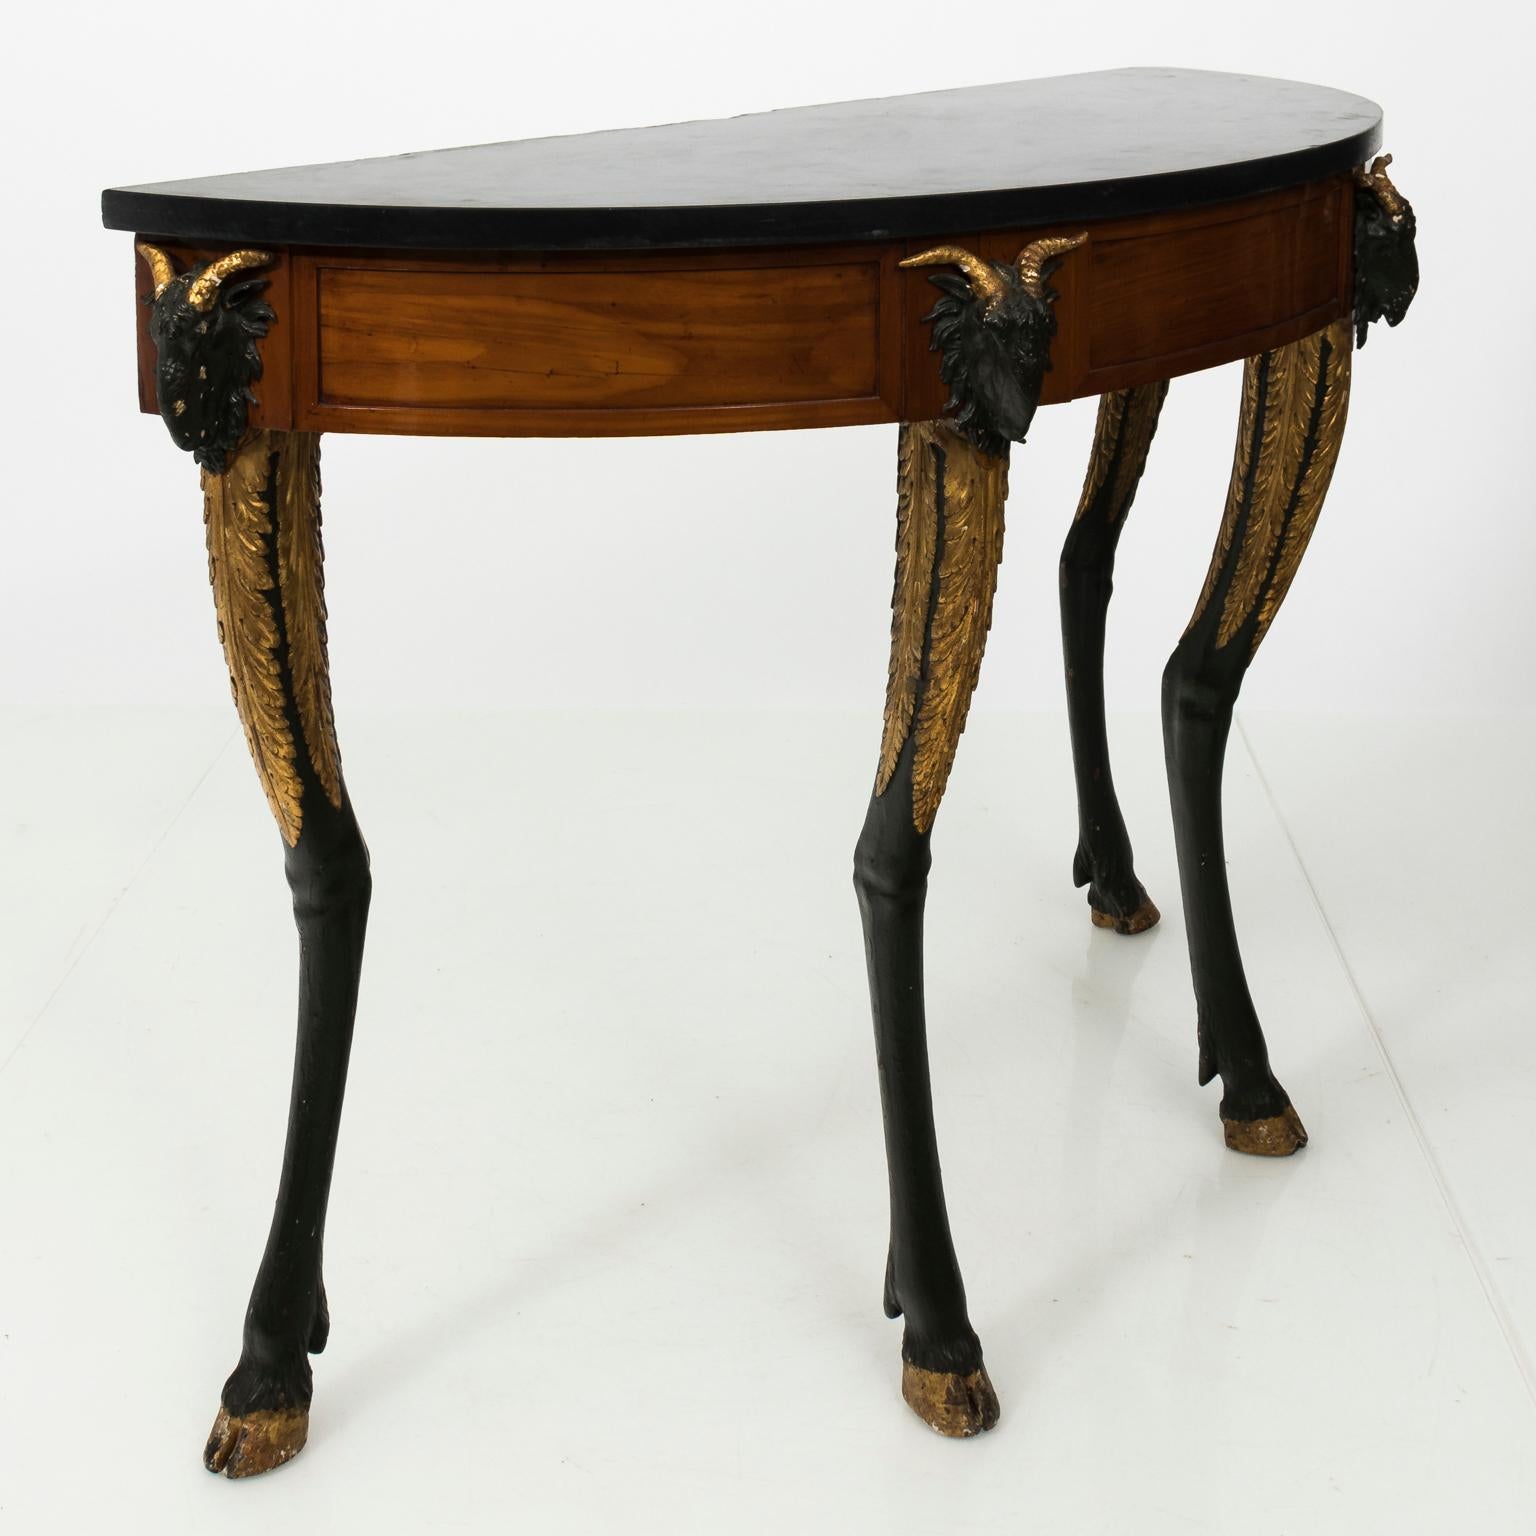 Italian gilded olivewood demilune console table with original black marble top. This table also features black painted ram's heads on the skirt, carved ram's hoof legs, and waterleaves on the knees, circa late 18th century.
 